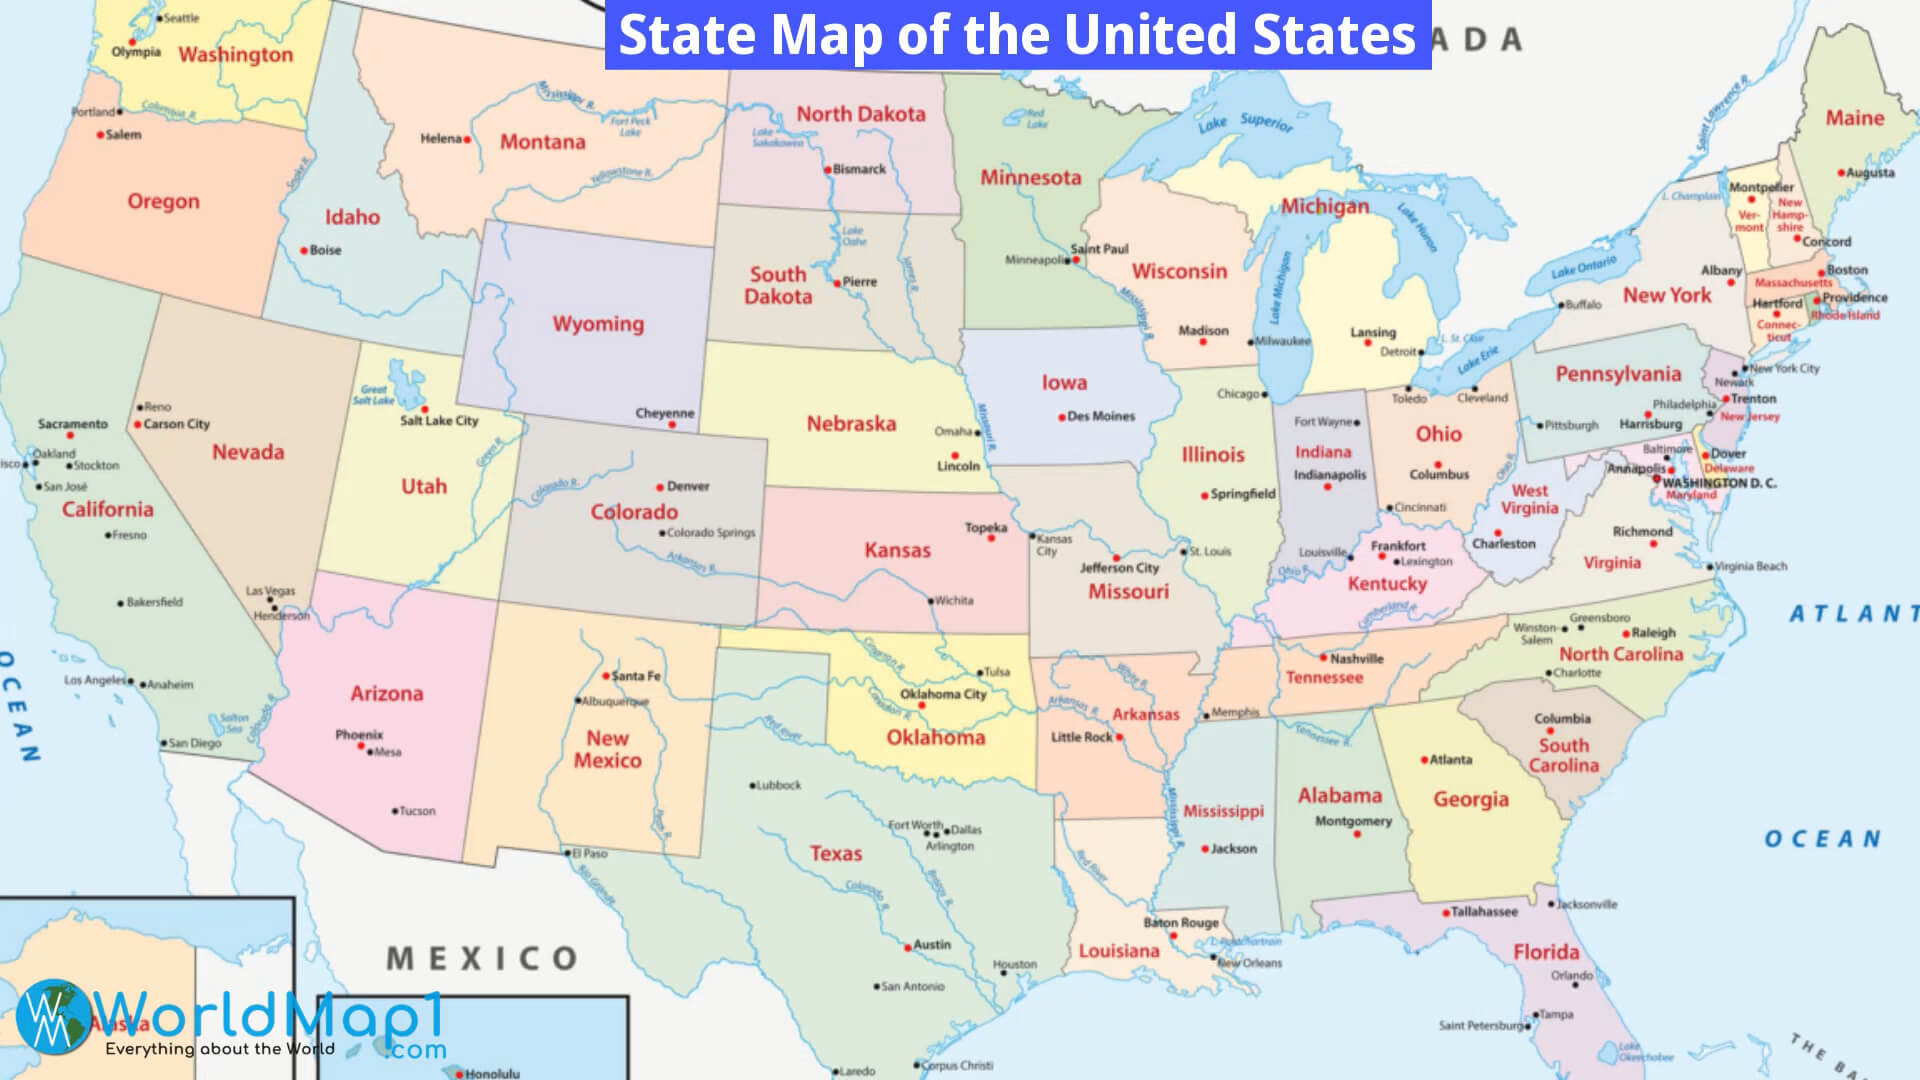 State Map of the United States